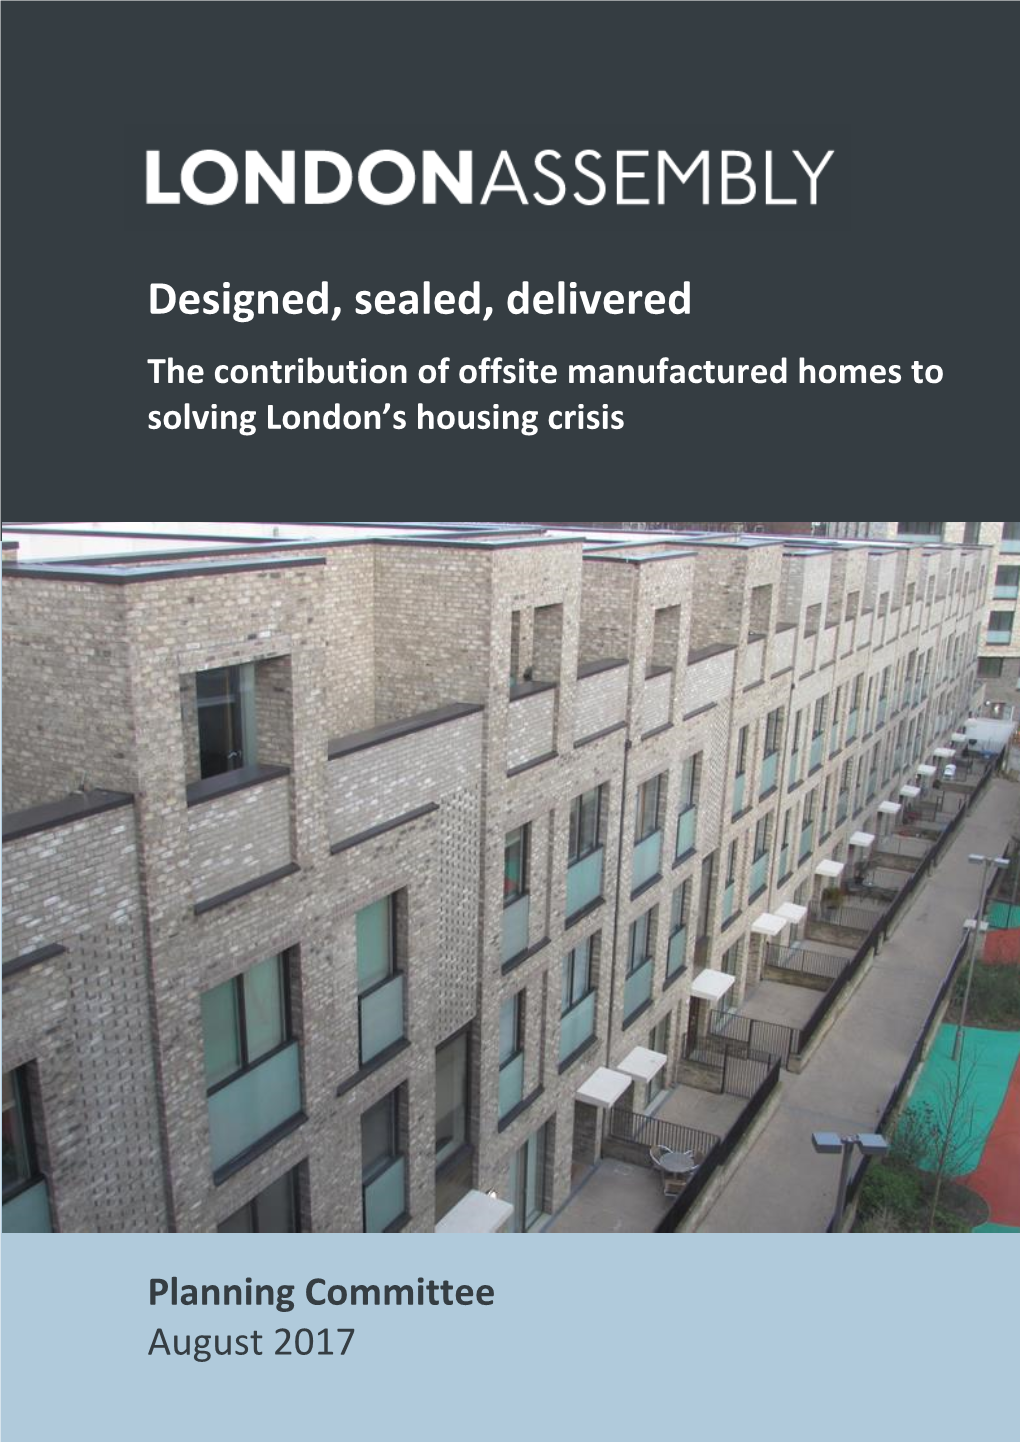 Design, Sealed, Delivered: the Contribution of Offsite Manufactured Homes to Solving London's Housing Crisis